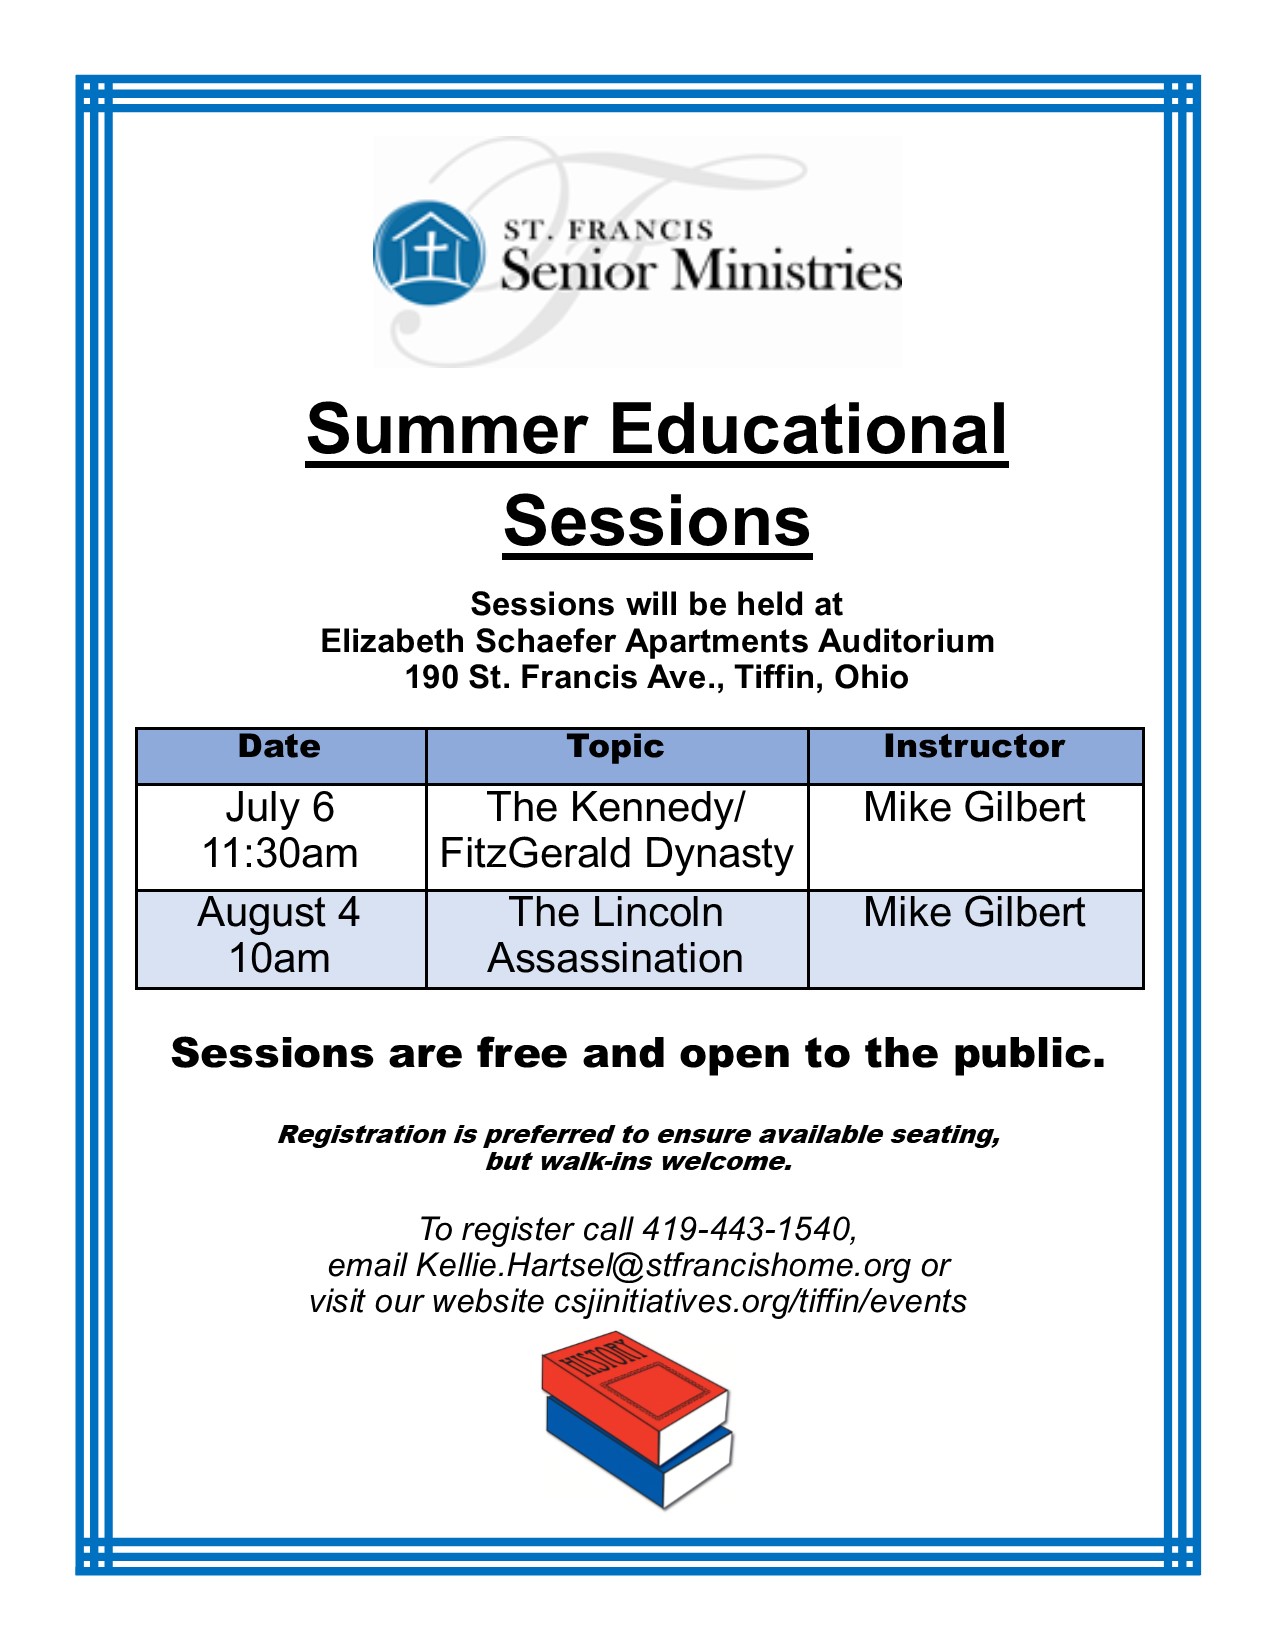 St. Francis Summer Educational Sessions | The Lincoln Assassination